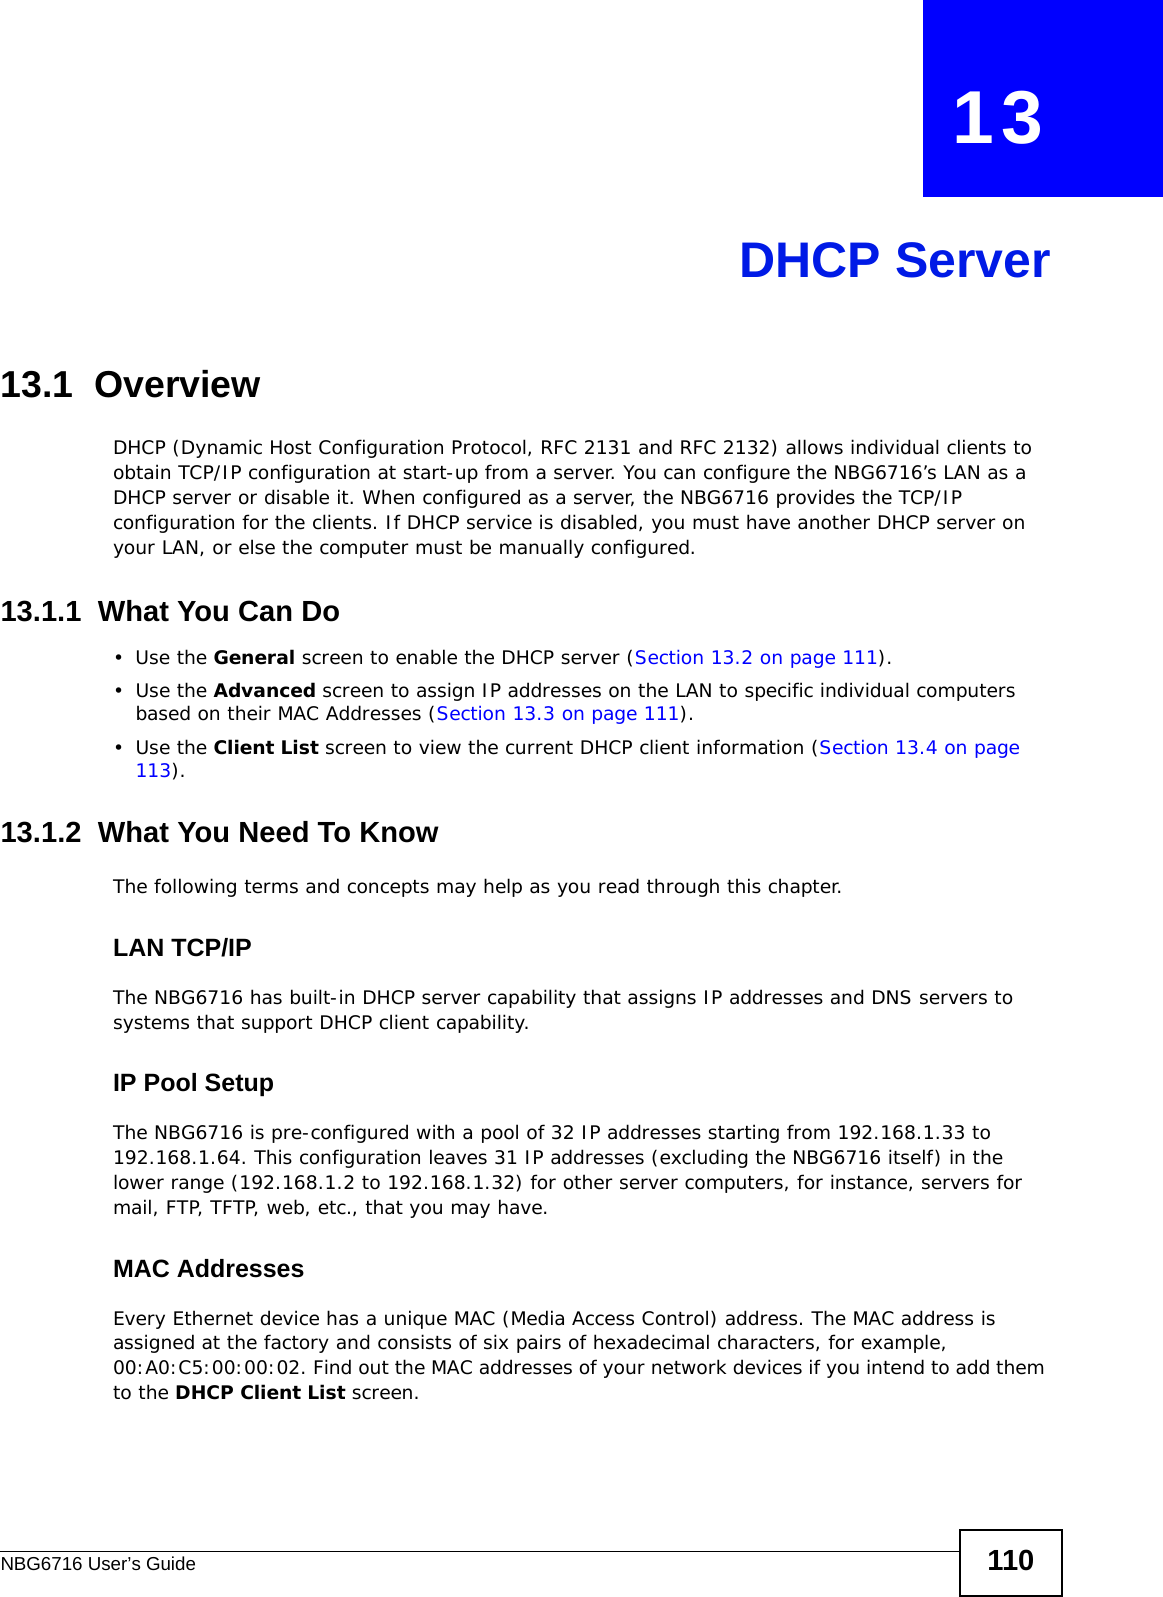 NBG6716 User’s Guide 110CHAPTER   13DHCP Server13.1  OverviewDHCP (Dynamic Host Configuration Protocol, RFC 2131 and RFC 2132) allows individual clients to obtain TCP/IP configuration at start-up from a server. You can configure the NBG6716’s LAN as a DHCP server or disable it. When configured as a server, the NBG6716 provides the TCP/IP configuration for the clients. If DHCP service is disabled, you must have another DHCP server on your LAN, or else the computer must be manually configured.13.1.1  What You Can Do•Use the General screen to enable the DHCP server (Section 13.2 on page 111).•Use the Advanced screen to assign IP addresses on the LAN to specific individual computers based on their MAC Addresses (Section 13.3 on page 111).•Use the Client List screen to view the current DHCP client information (Section 13.4 on page 113). 13.1.2  What You Need To KnowThe following terms and concepts may help as you read through this chapter.LAN TCP/IP The NBG6716 has built-in DHCP server capability that assigns IP addresses and DNS servers to systems that support DHCP client capability.IP Pool SetupThe NBG6716 is pre-configured with a pool of 32 IP addresses starting from 192.168.1.33 to 192.168.1.64. This configuration leaves 31 IP addresses (excluding the NBG6716 itself) in the lower range (192.168.1.2 to 192.168.1.32) for other server computers, for instance, servers for mail, FTP, TFTP, web, etc., that you may have.MAC AddressesEvery Ethernet device has a unique MAC (Media Access Control) address. The MAC address is assigned at the factory and consists of six pairs of hexadecimal characters, for example, 00:A0:C5:00:00:02. Find out the MAC addresses of your network devices if you intend to add them to the DHCP Client List screen.